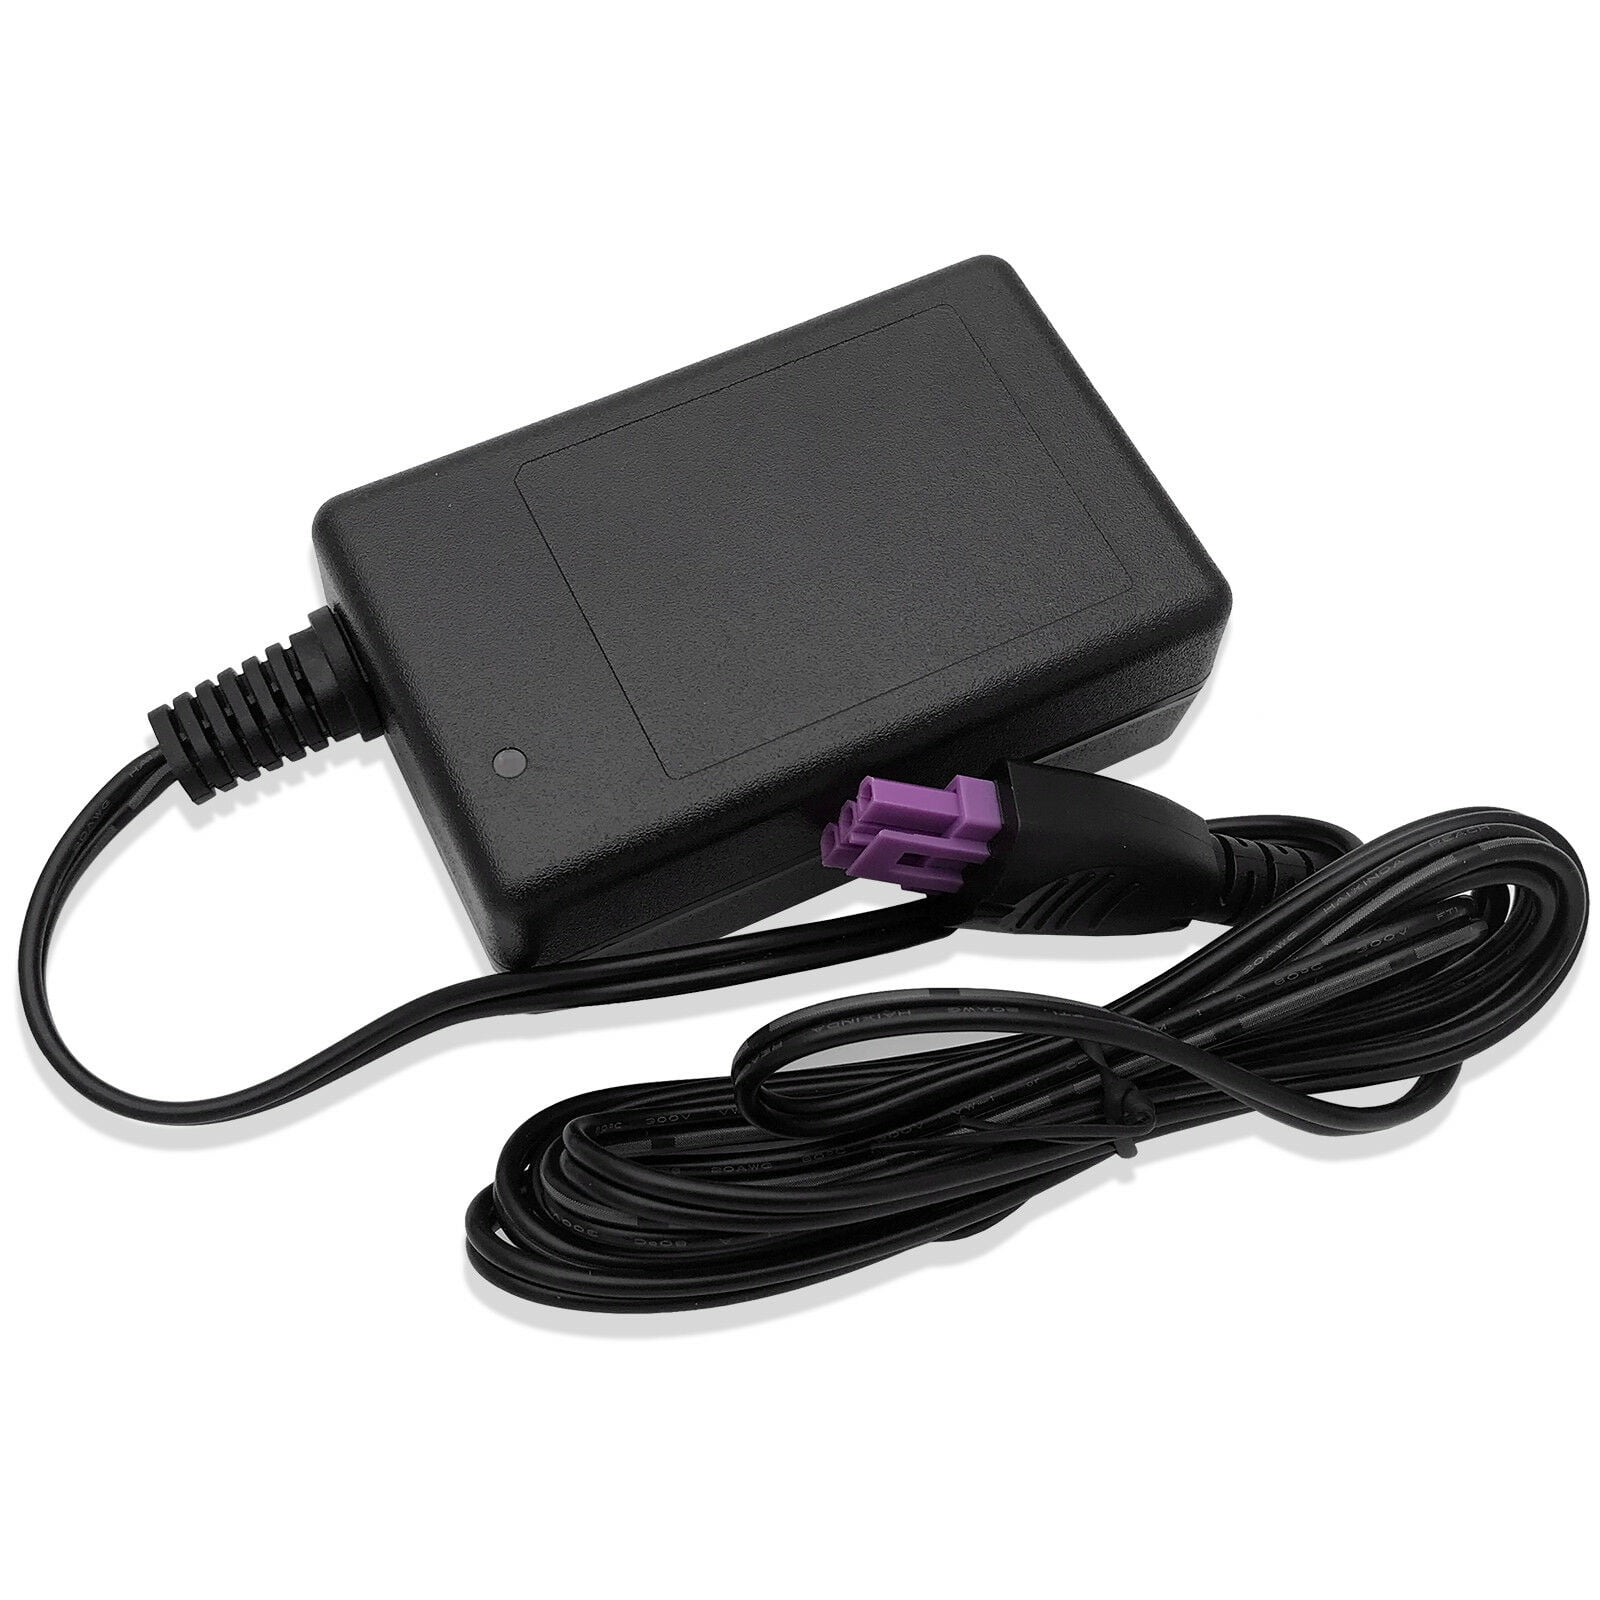 AC Power Adapter Charger Cord For HP Deskjet 2000 2050 2054A 2510 2511 Printer 